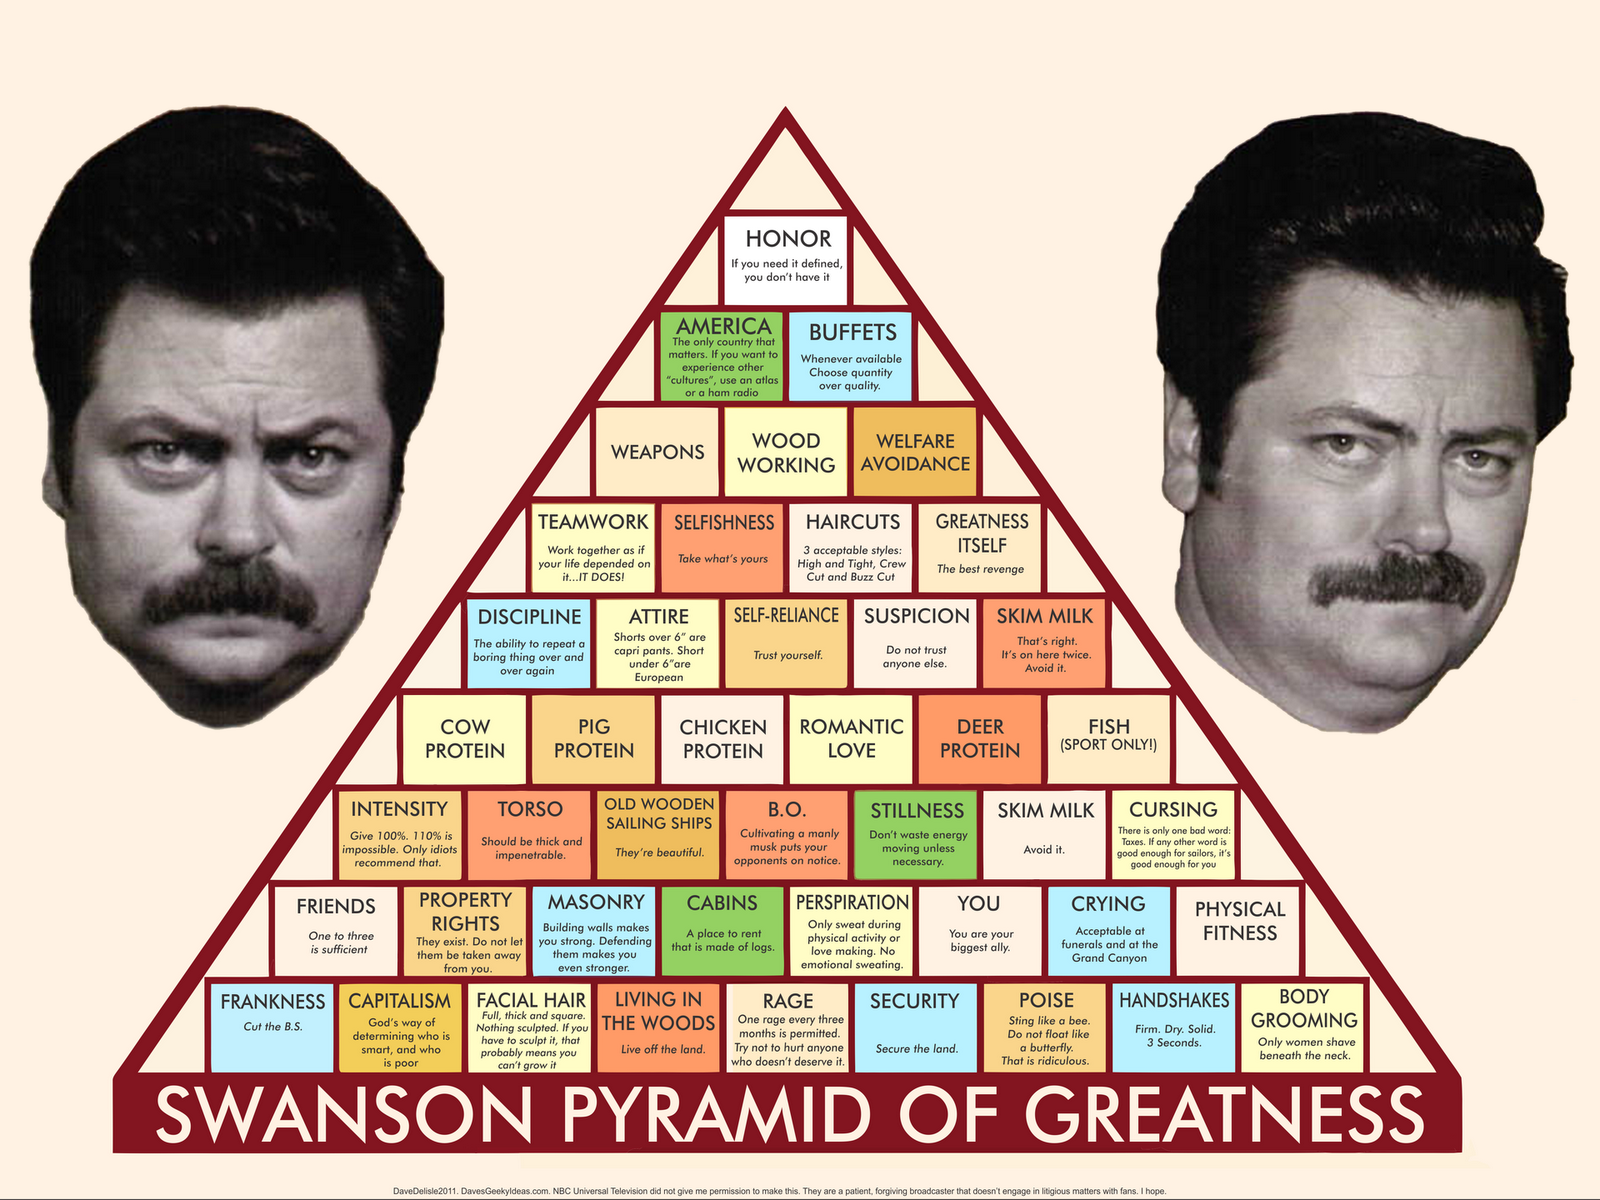 ron-swanson-pyramid-of-greatness-wallpaper-fs1920x1440.png